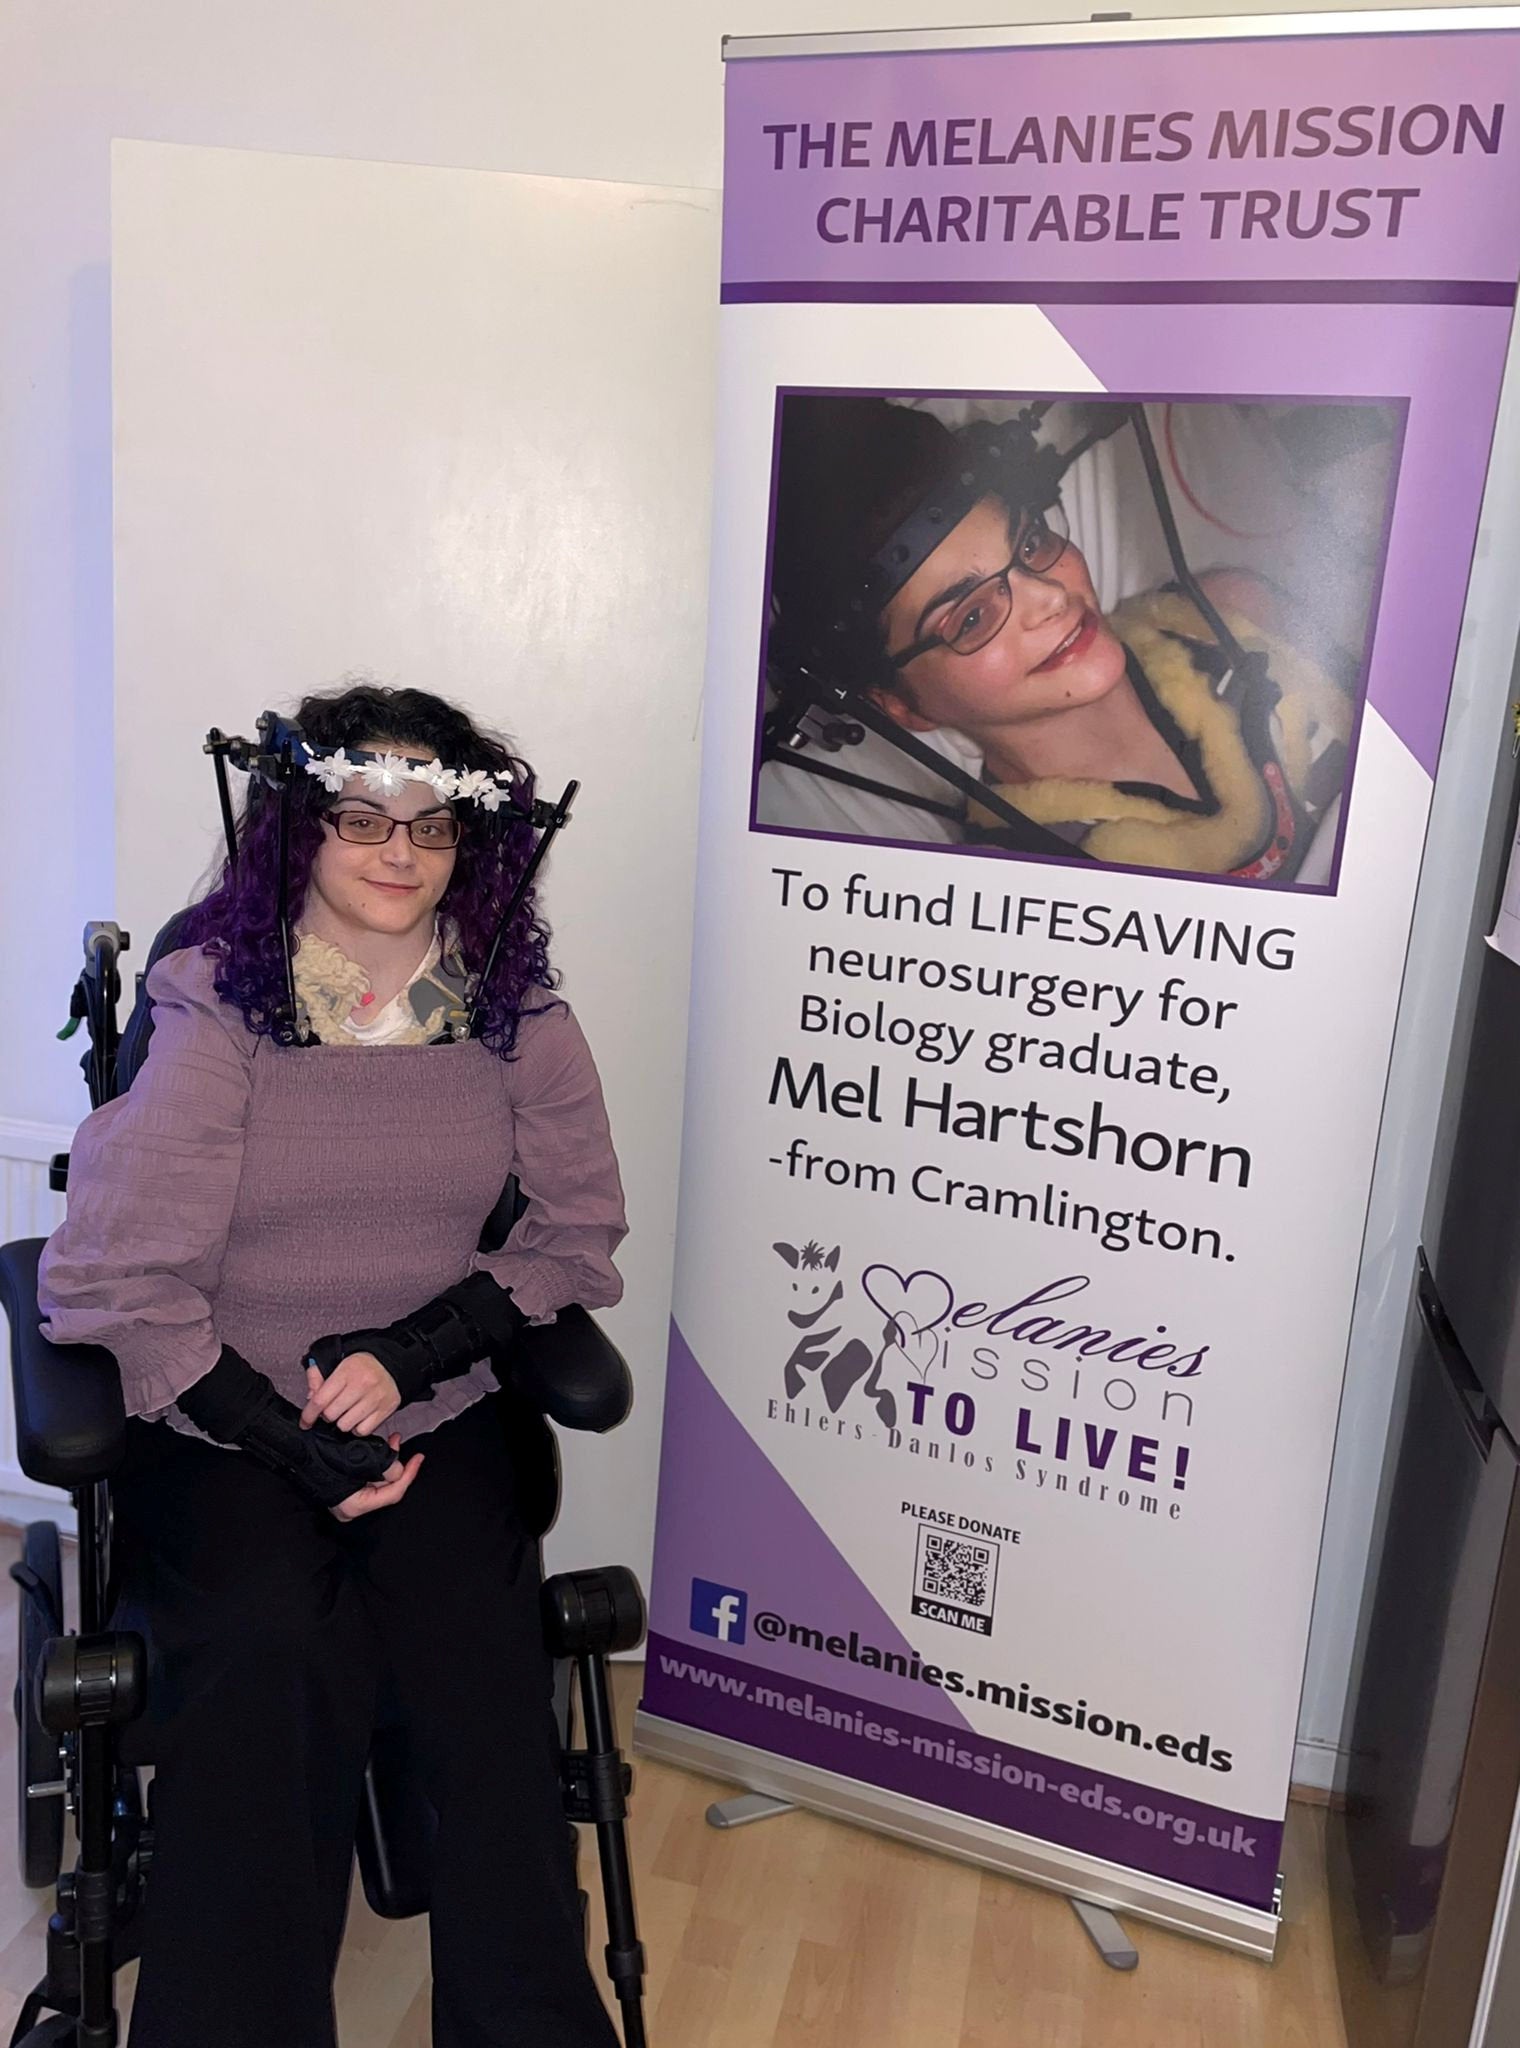 Melanie Hartshorn, a 32-year-old from Cramlington, Northumberland, suffers from Ehlers-Danlos Syndrome (EDS) and a rare form of muscular dystrophy